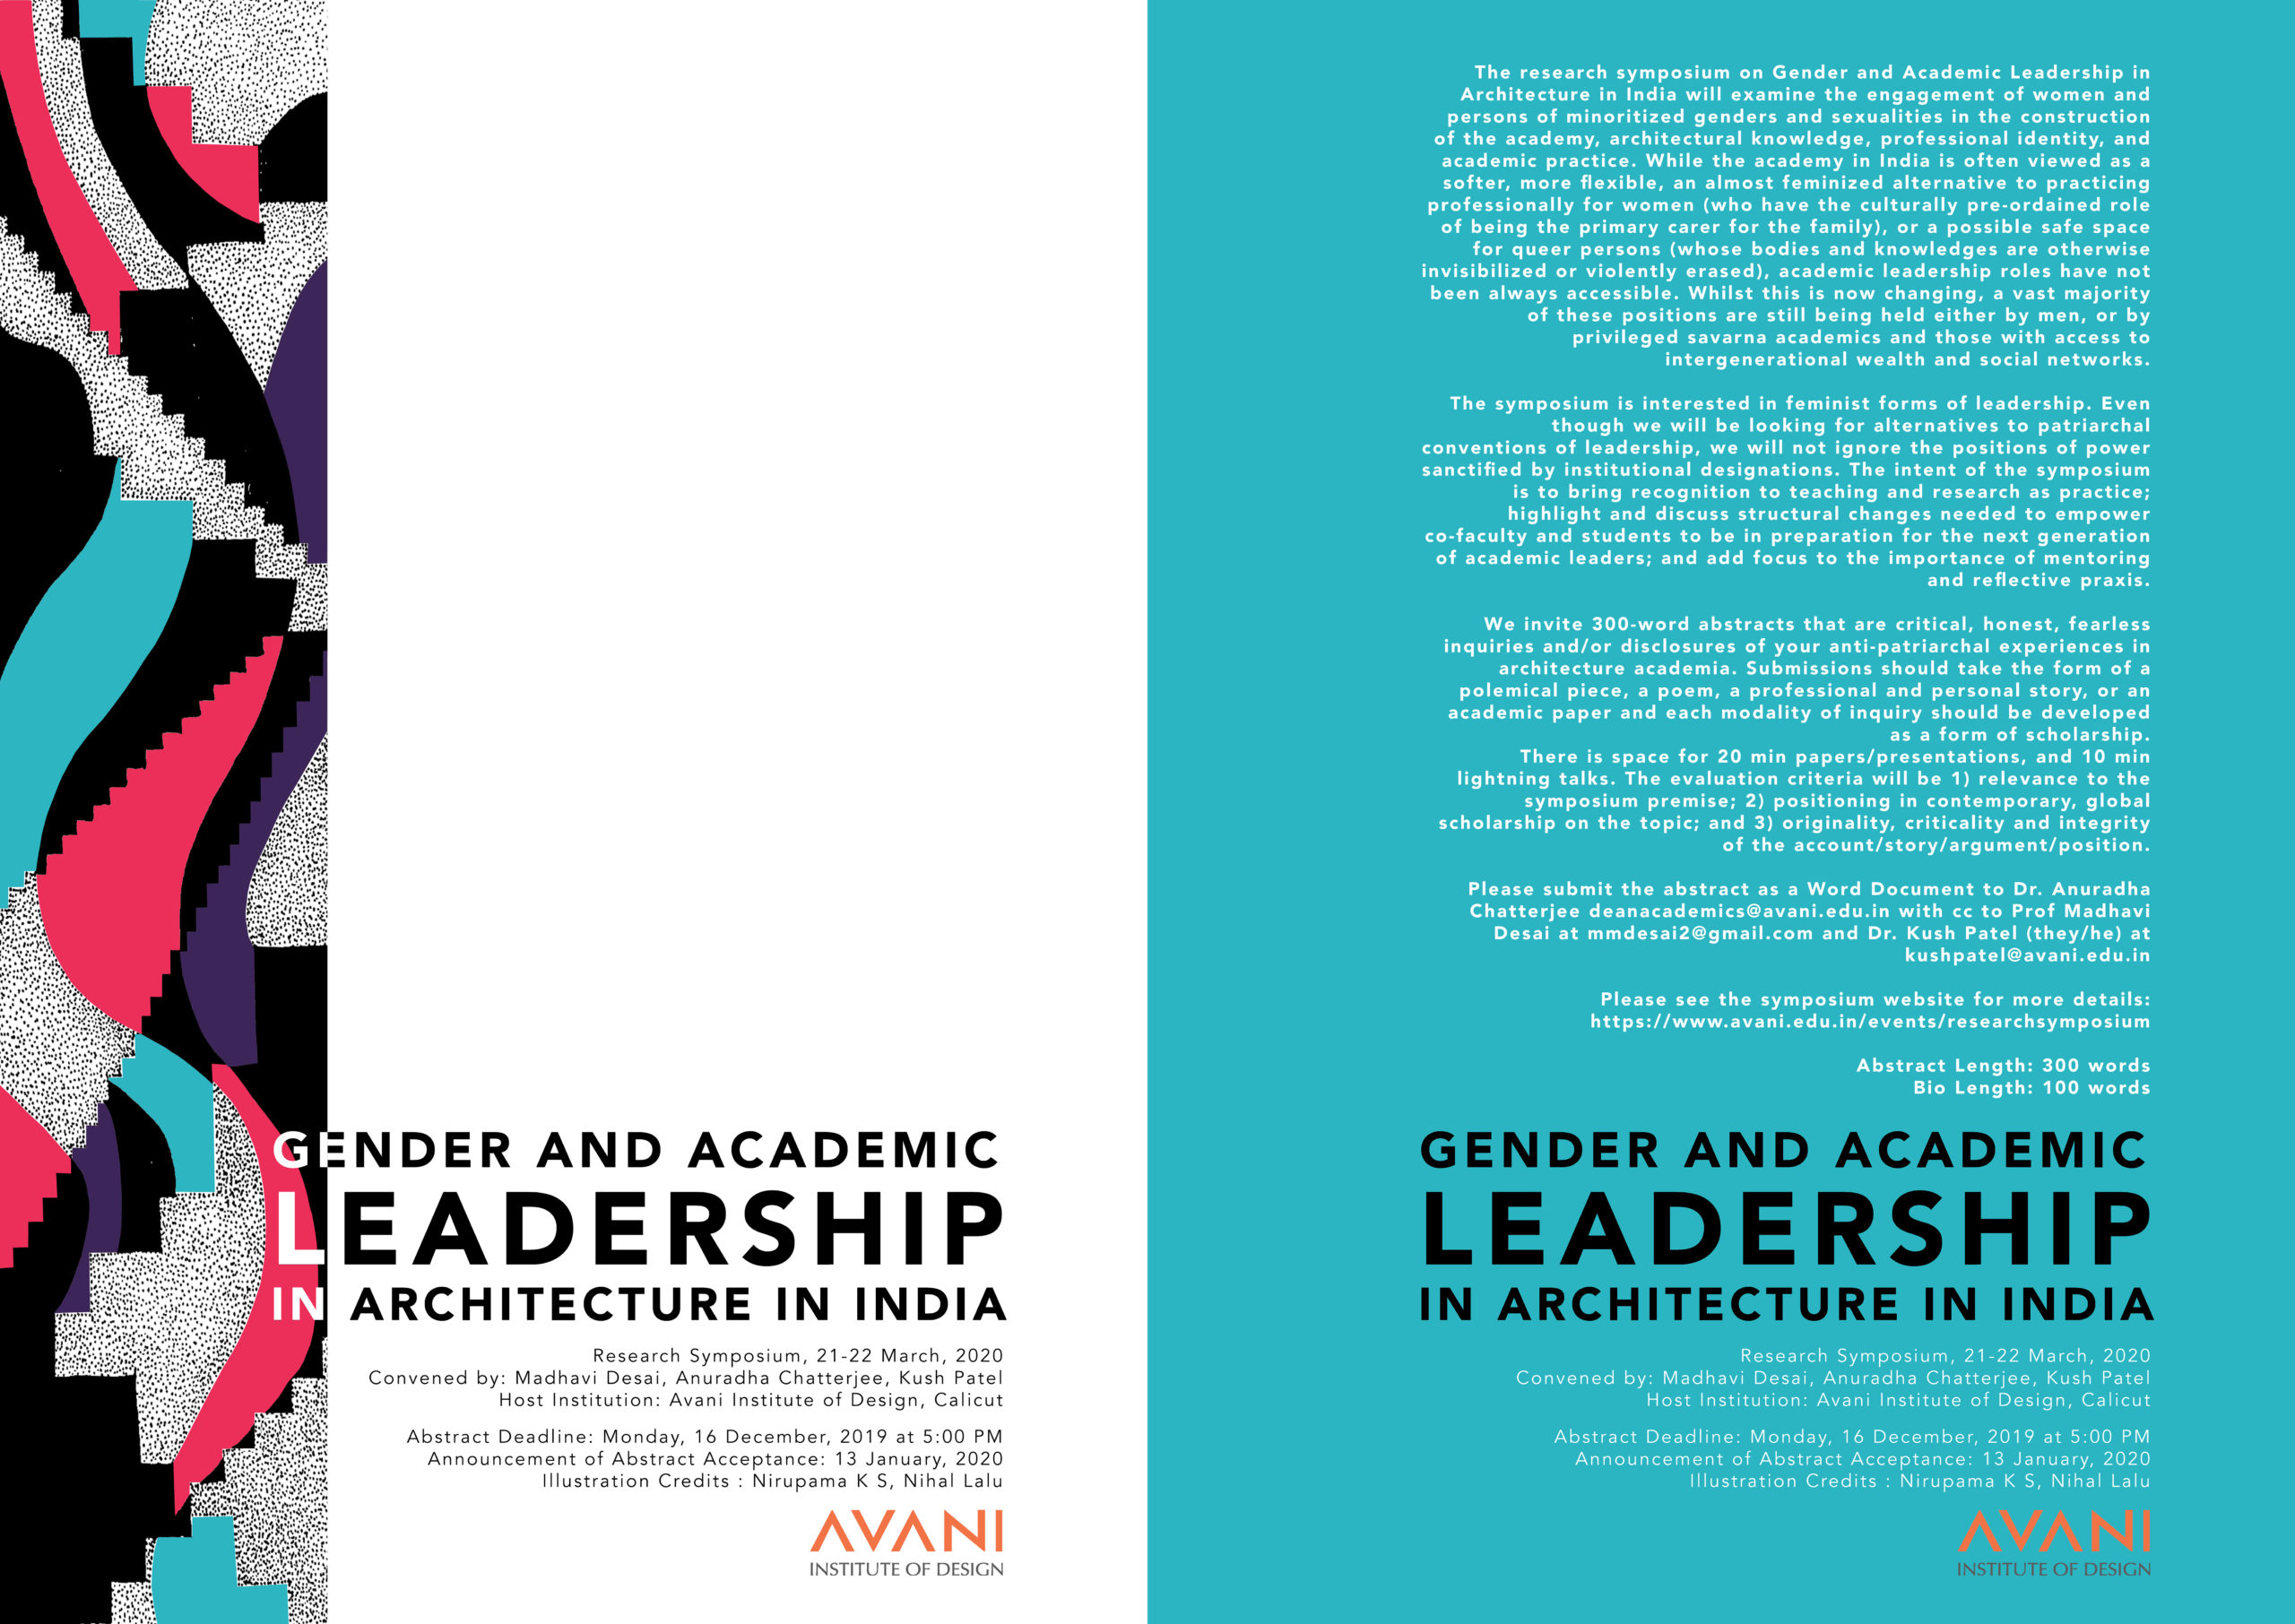 CALL FOR PAPERS: Gender and Academic Leadership in Architecture in India, Avani Institute of Design 1